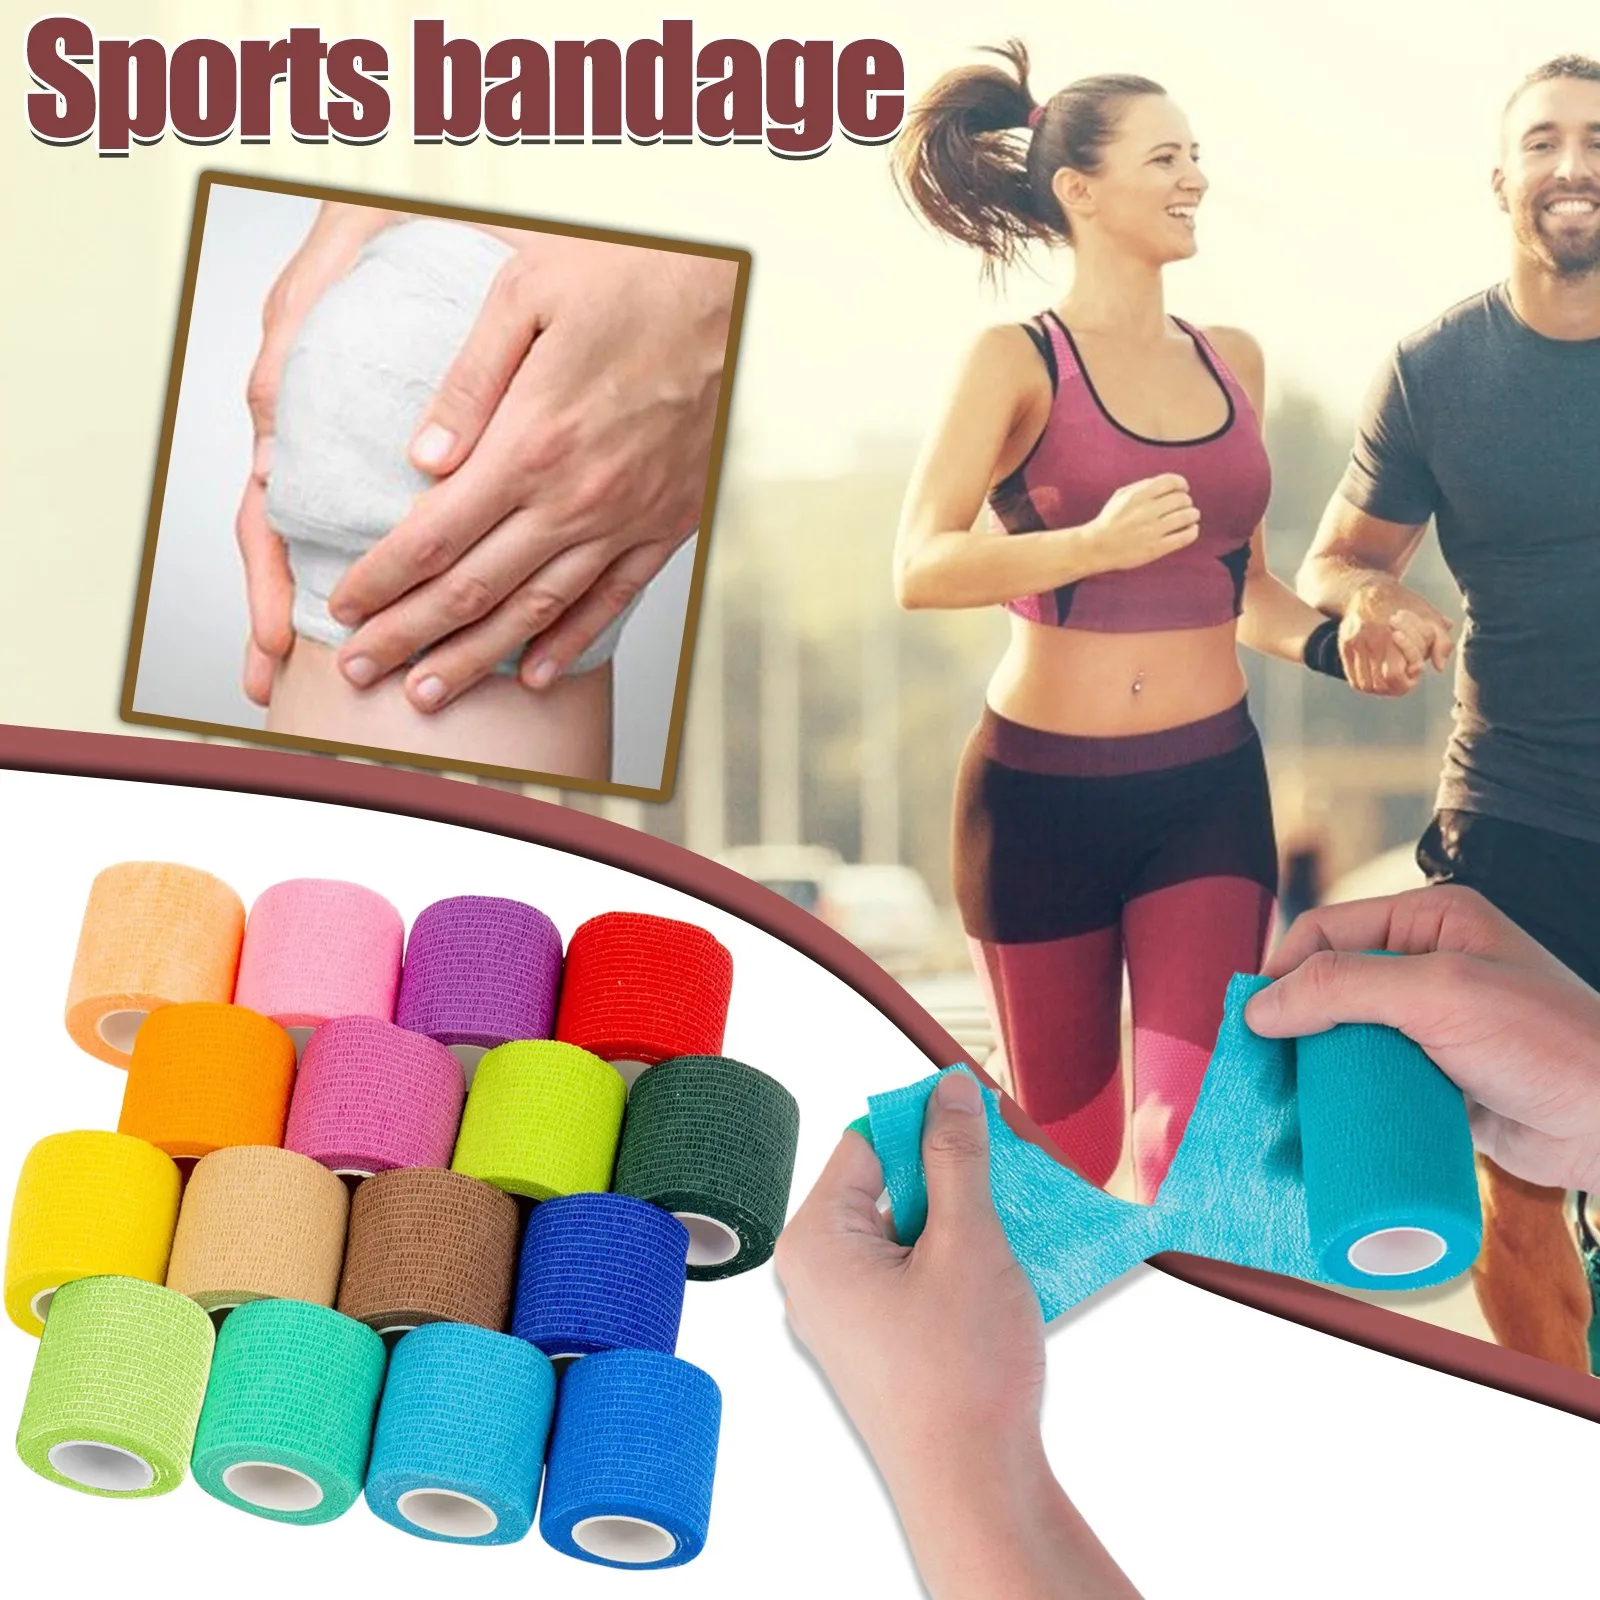 

16pcs 2.5cm*4.5m Waterproof Elastic Self Adhesive Bandage Tape Nonwoven Cohesive Aid Kit For Ankle Finger Muscle Care Tools